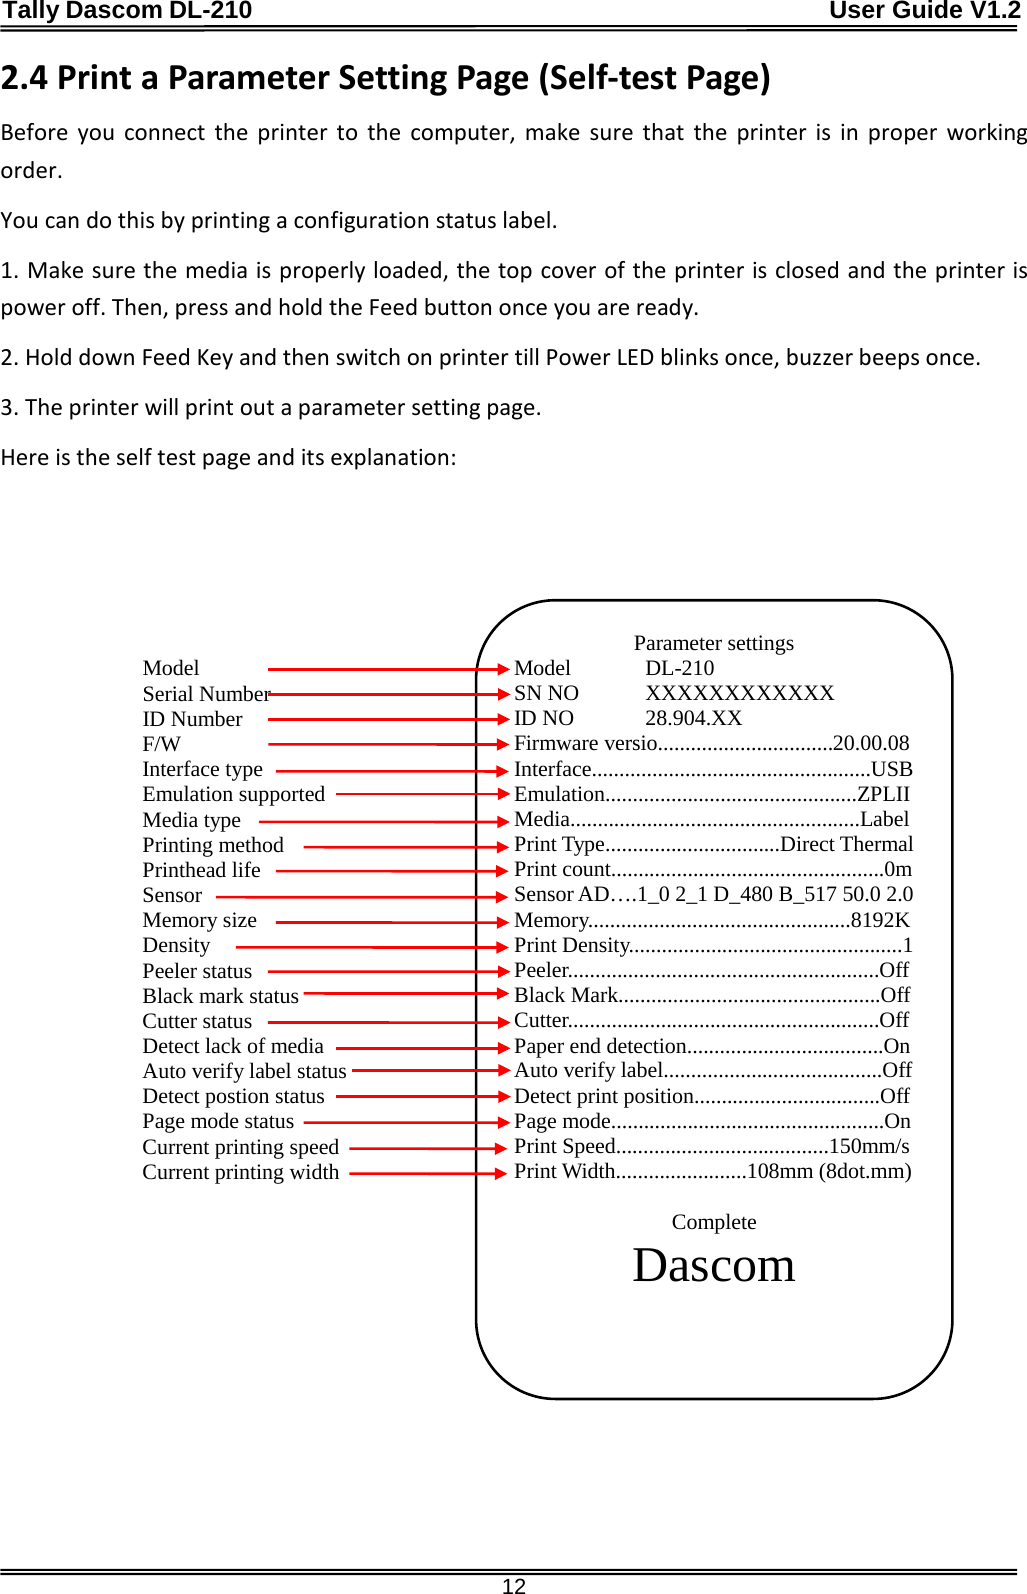 Tally Dascom DL-210                                              User Guide V1.2  12 2.4 Print a Parameter Setting Page (Self-test Page) Before you connect the printer to the computer, make sure that the printer is in proper working order. You can do this by printing a configuration status label. 1. Make sure the media is properly loaded, the top cover of the printer is closed and the printer is power off. Then, press and hold the Feed button once you are ready. 2. Hold down Feed Key and then switch on printer till Power LED blinks once, buzzer beeps once. 3. The printer will print out a parameter setting page.   Here is the self test page and its explanation:           Model Serial Number ID Number F/W   Interface type Emulation supported Media type Printing method Printhead life Sensor Memory size Density Peeler status Black mark status Cutter status Detect lack of media Auto verify label status Detect postion status Page mode status Current printing speed Current printing width   Parameter settings Model    DL-210 SN NO    XXXXXXXXXXXX ID NO    28.904.XX   Firmware versio................................20.00.08 Interface...................................................USB Emulation..............................................ZPLII Media.....................................................Label Print Type................................Direct Thermal Print count..................................................0m Sensor AD….1_0 2_1 D_480 B_517 50.0 2.0 Memory................................................8192K Print Density..................................................1 Peeler.........................................................Off Black Mark................................................Off Cutter.........................................................Off Paper end detection....................................On Auto verify label........................................Off Detect print position..................................Off Page mode..................................................On Print Speed.......................................150mm/s Print Width........................108mm (8dot.mm)  Complete Dascom 